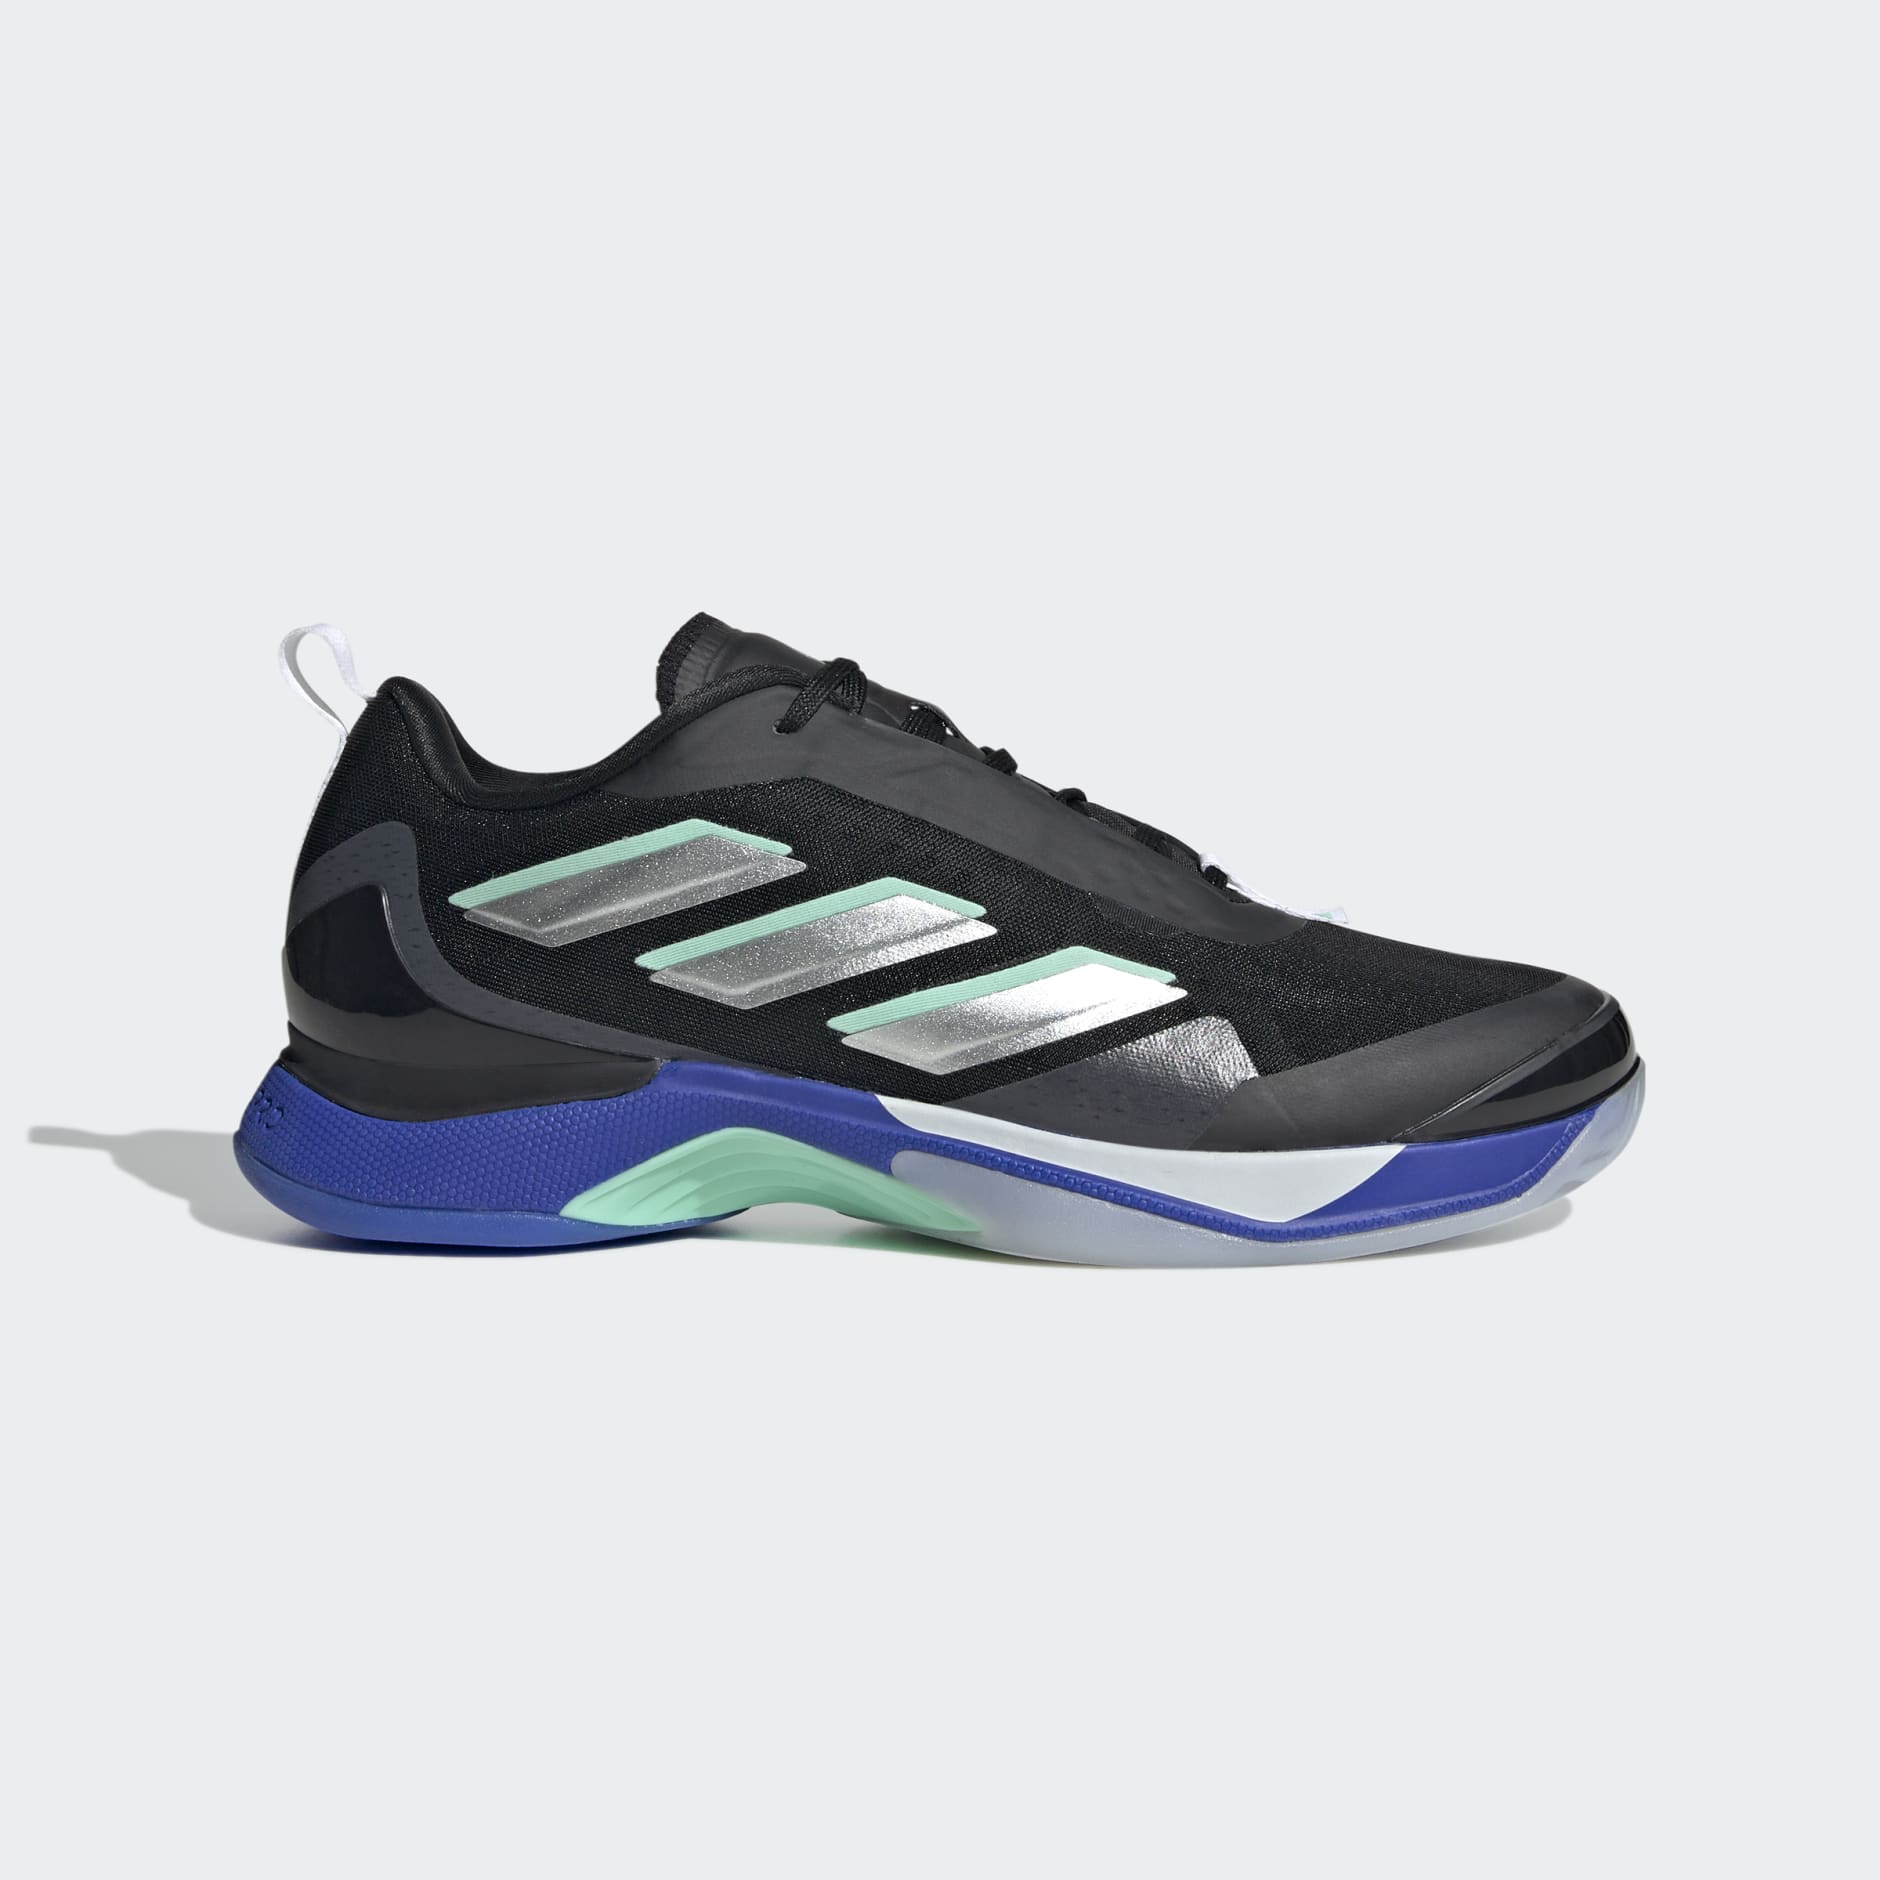 Shoes - AVACOURT SHOES - Black | adidas South Africa